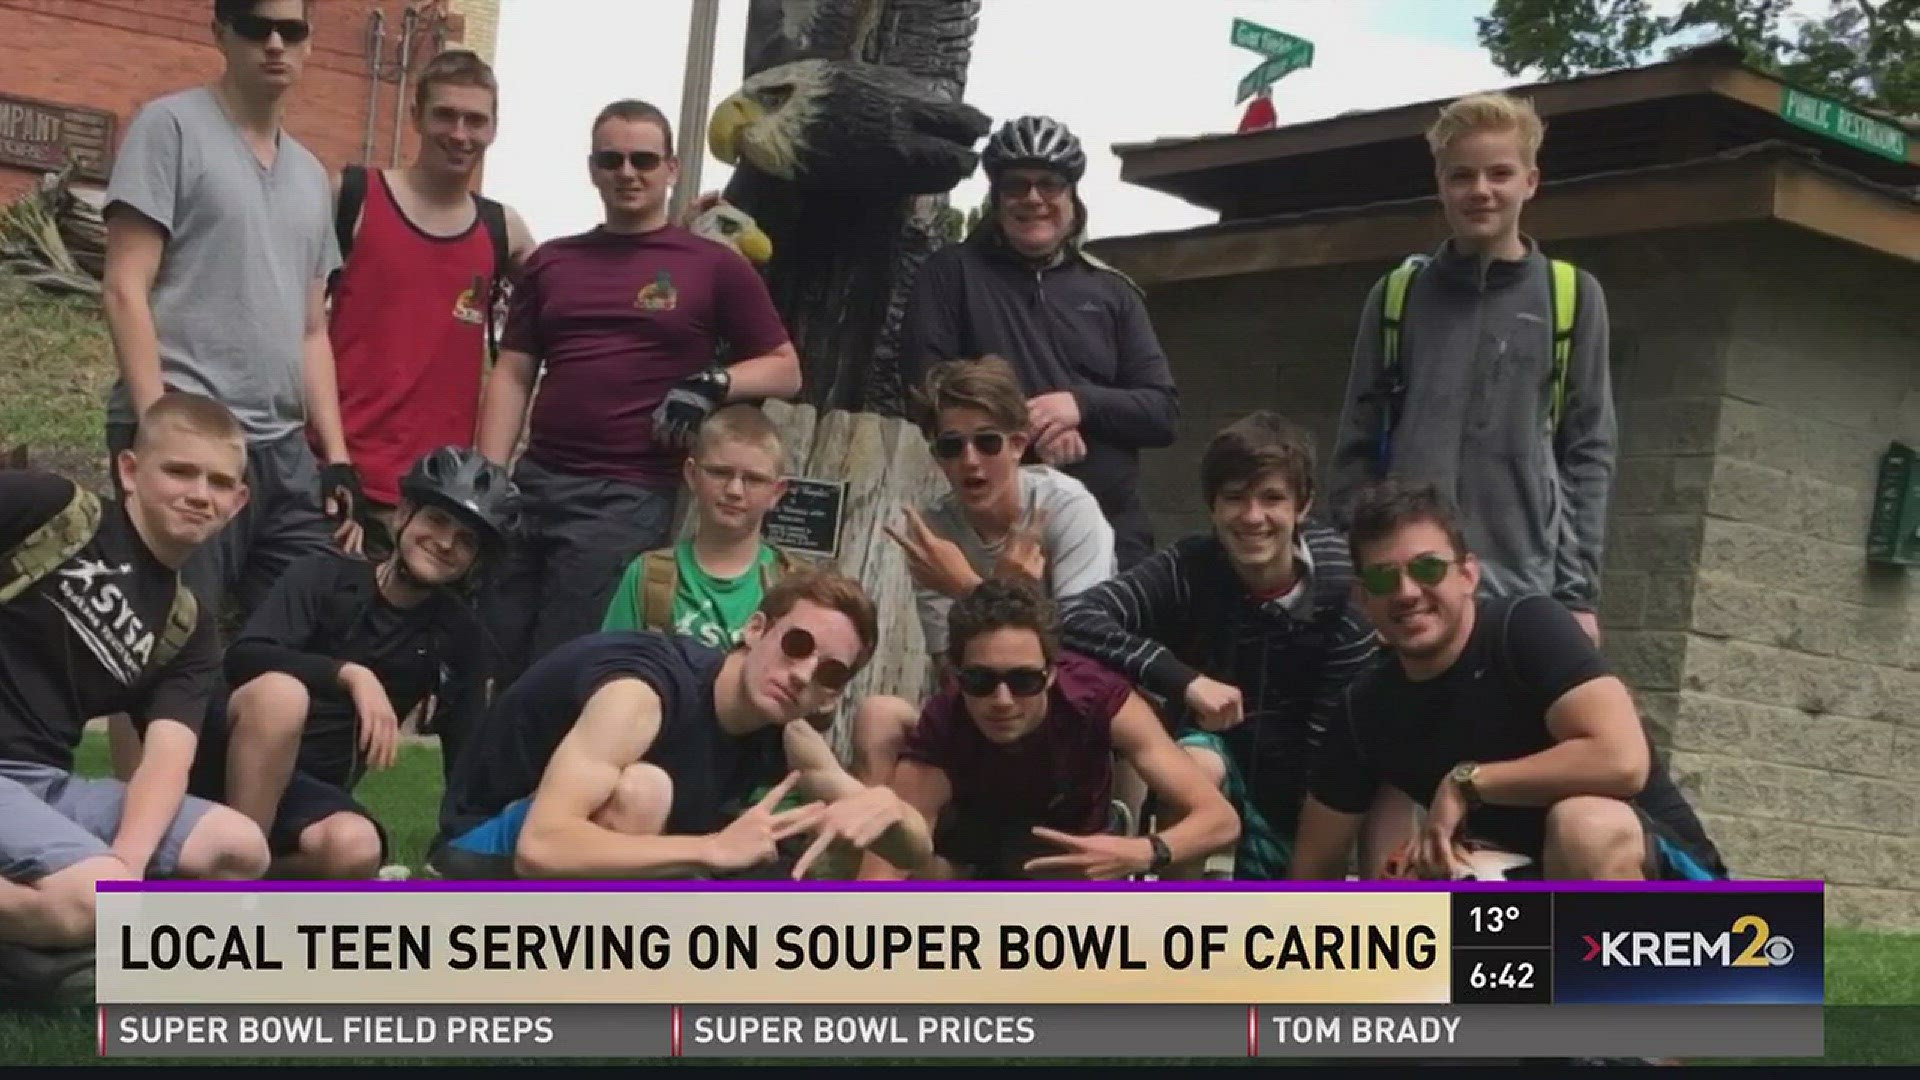 Local teen serves on Souper Bowl of Caring board